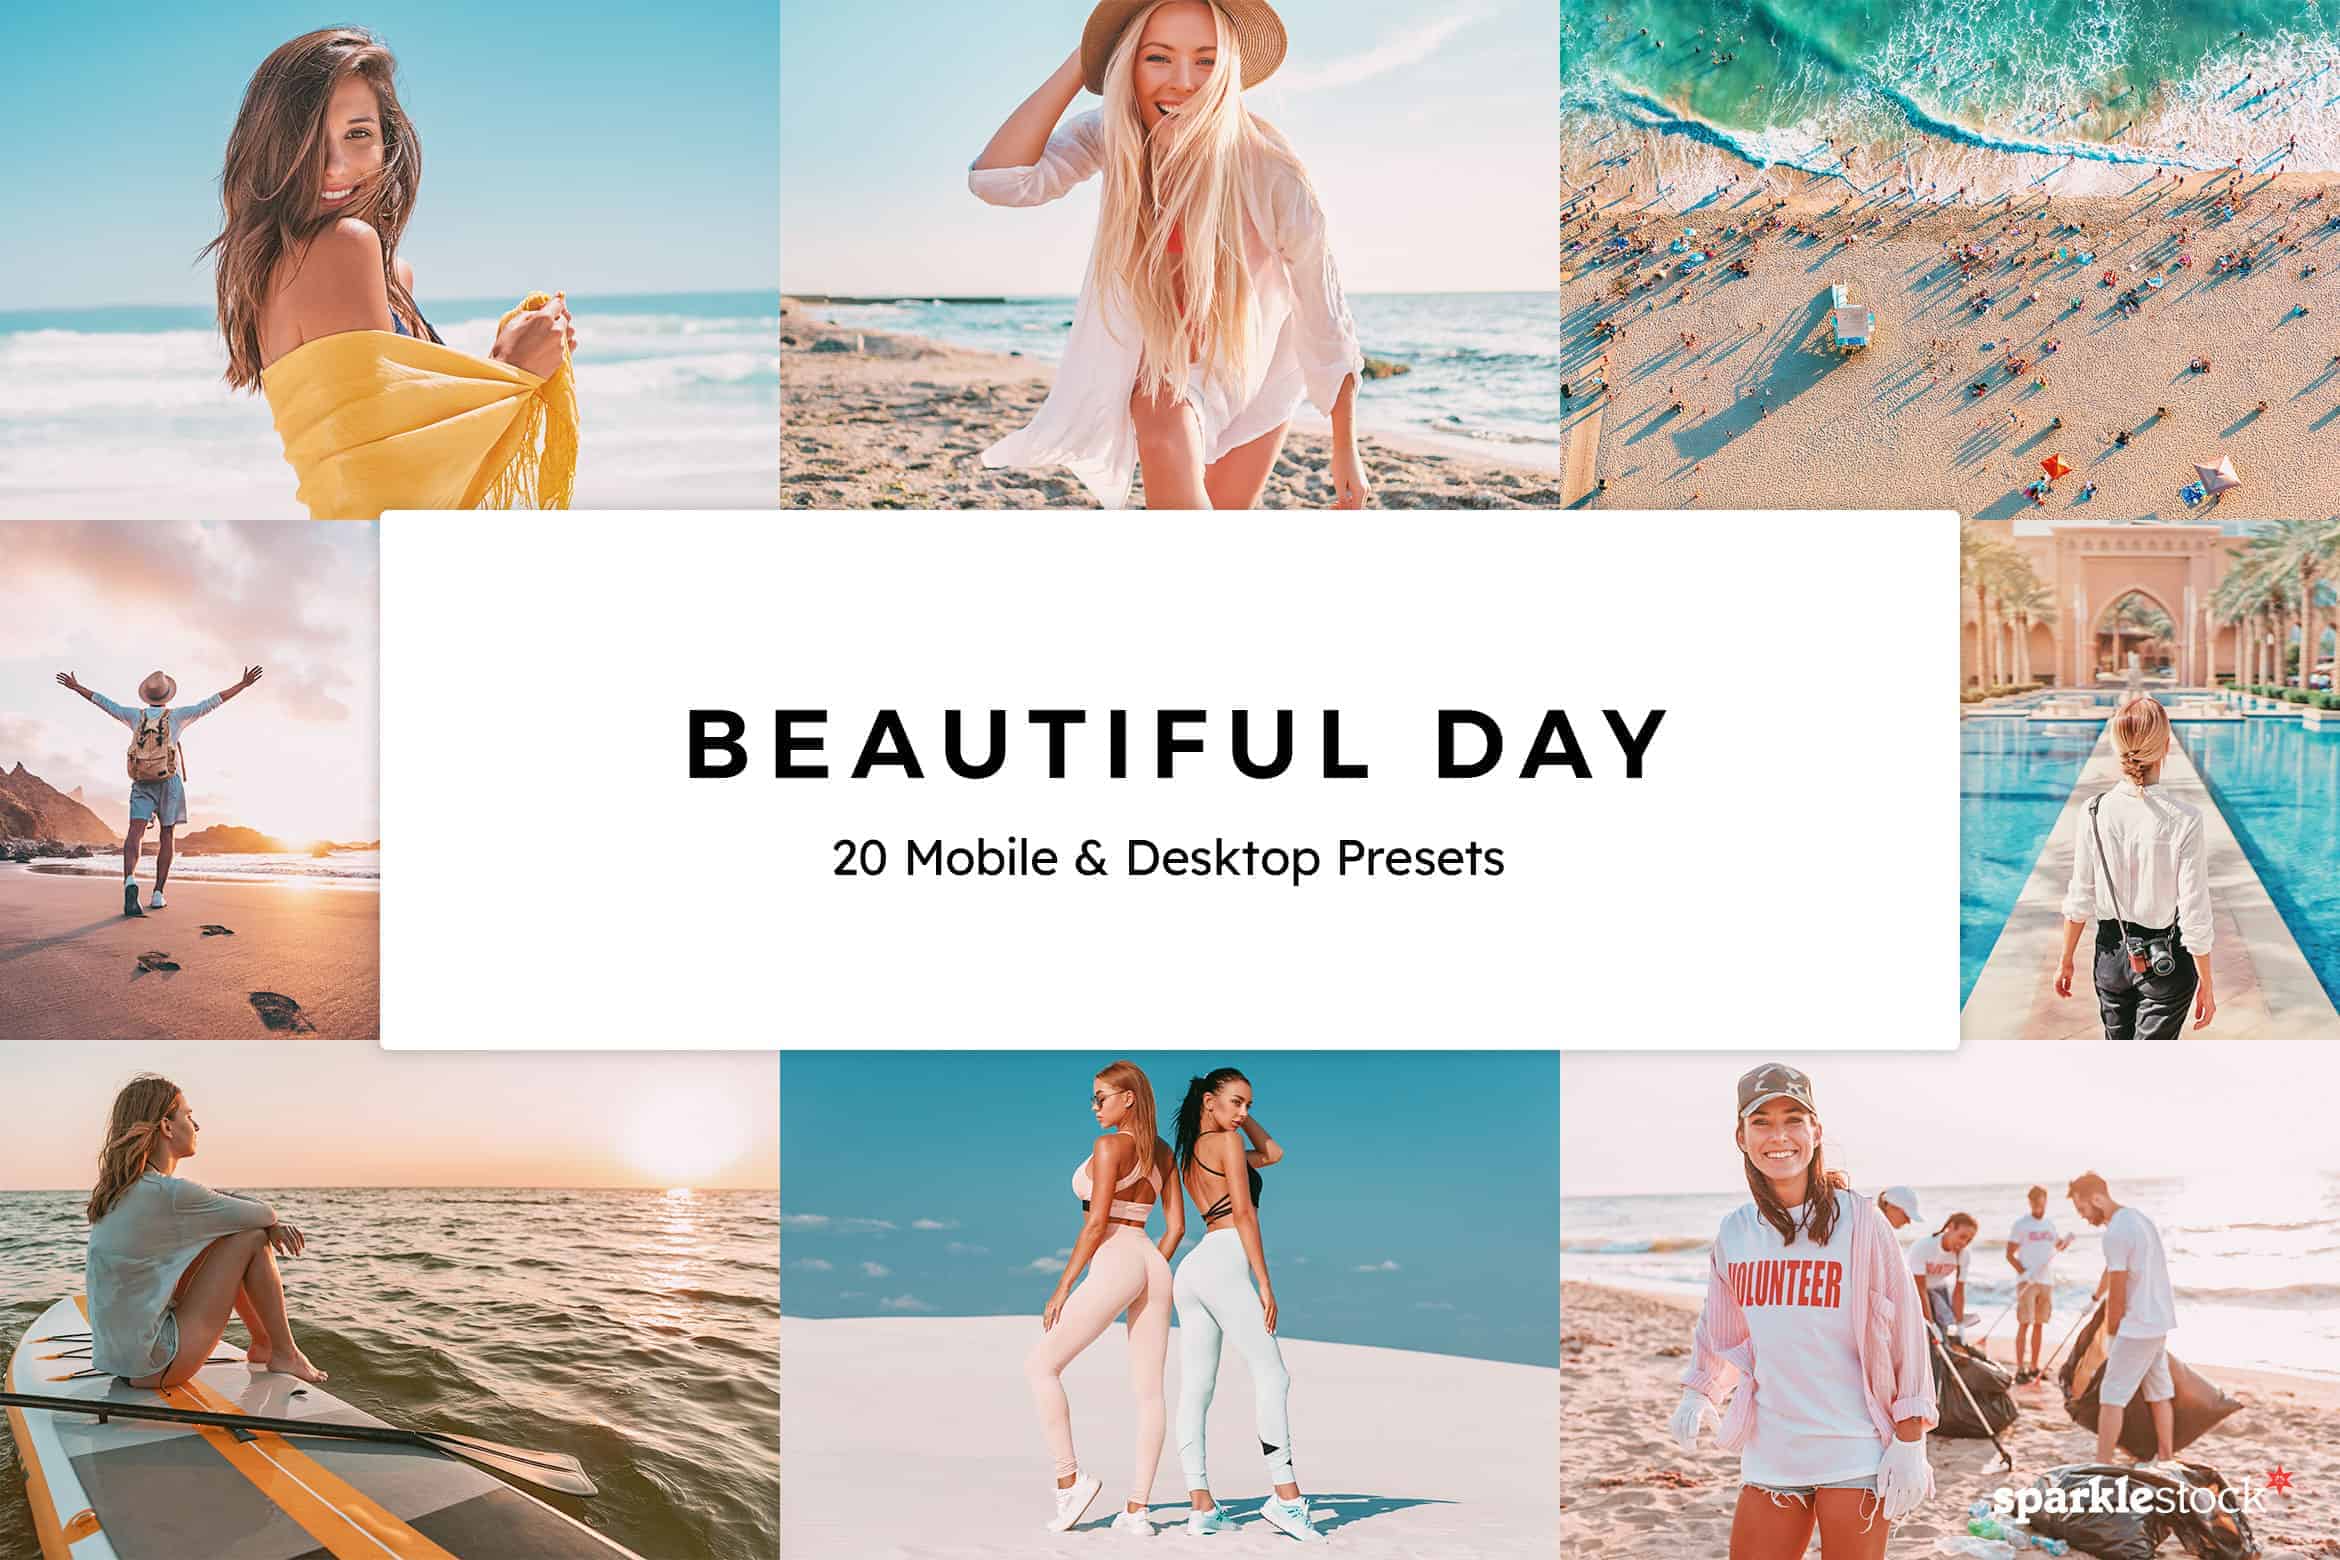 8 Free Beautiful Day Lightroom Presets and LUTs